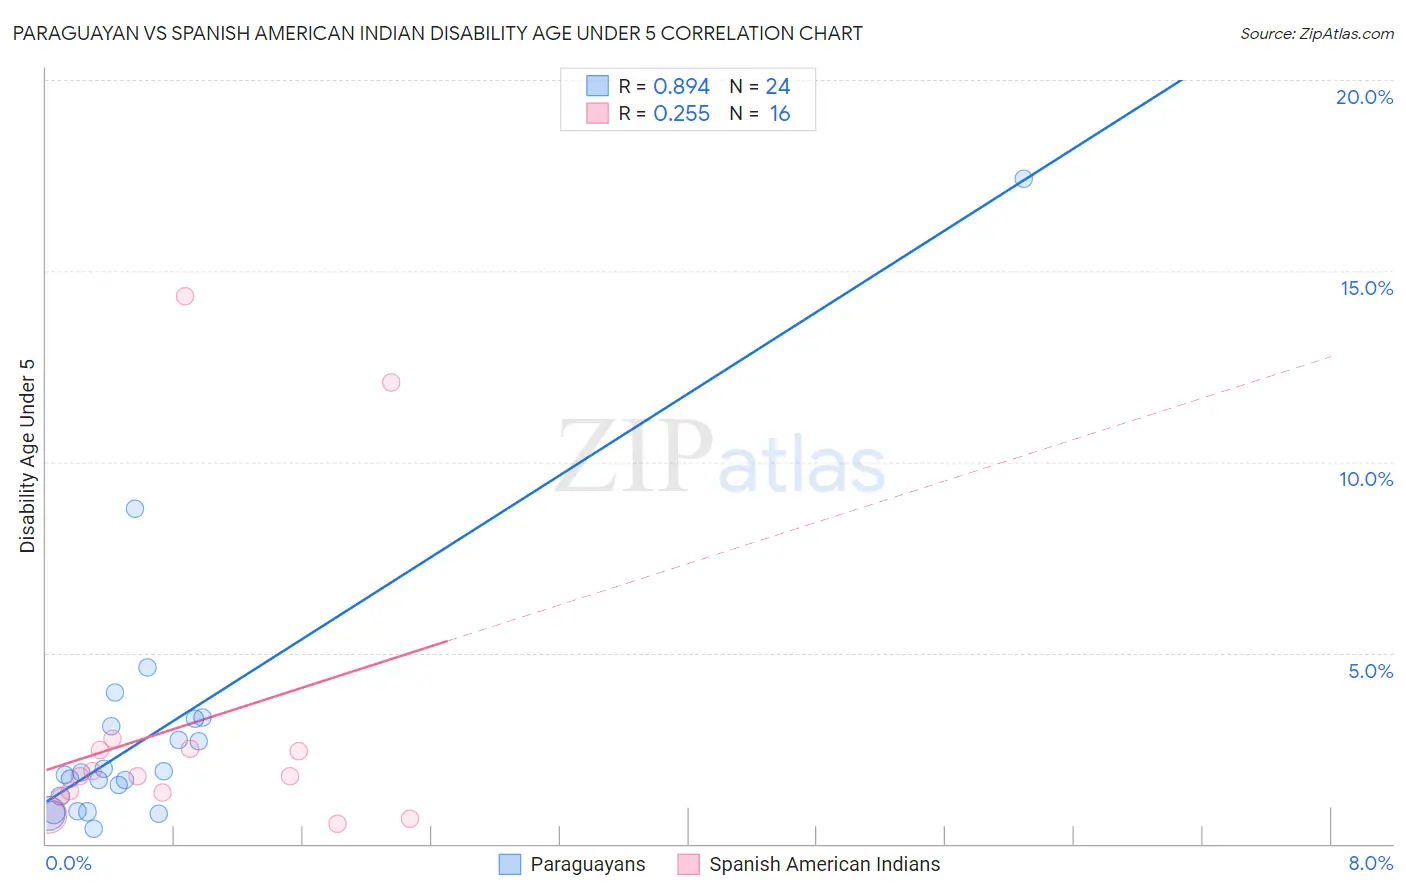 Paraguayan vs Spanish American Indian Disability Age Under 5